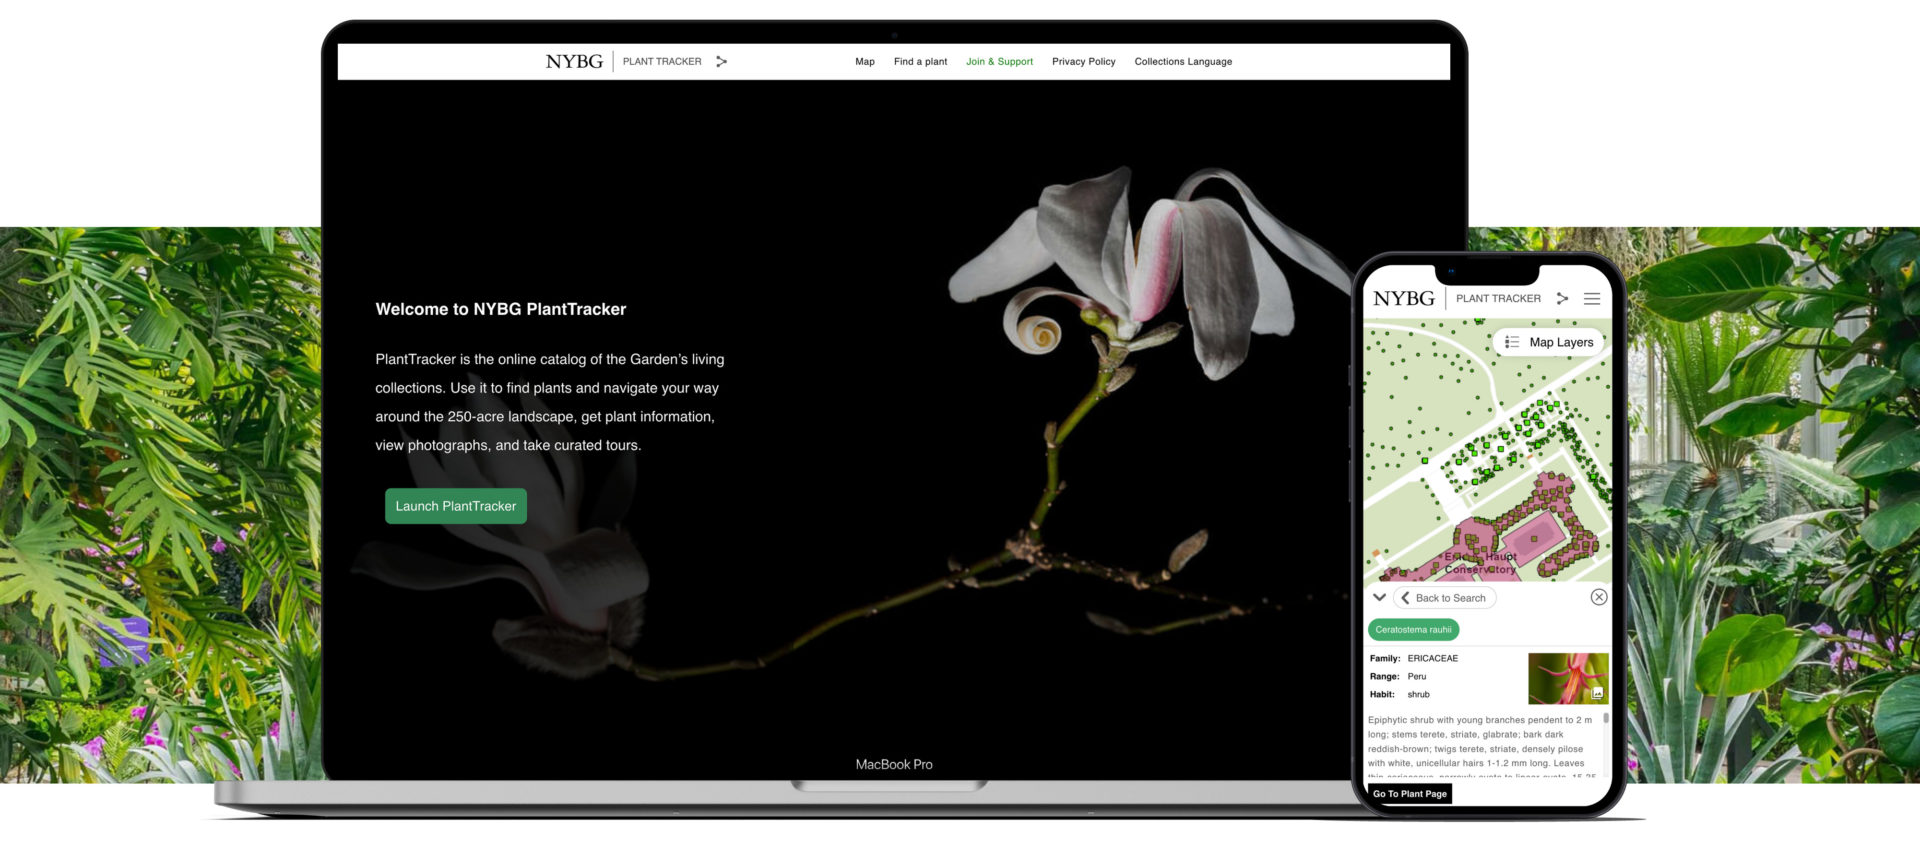 New York Botanical Gardens Plant Tracker App displayed in a laptop and iPhone.